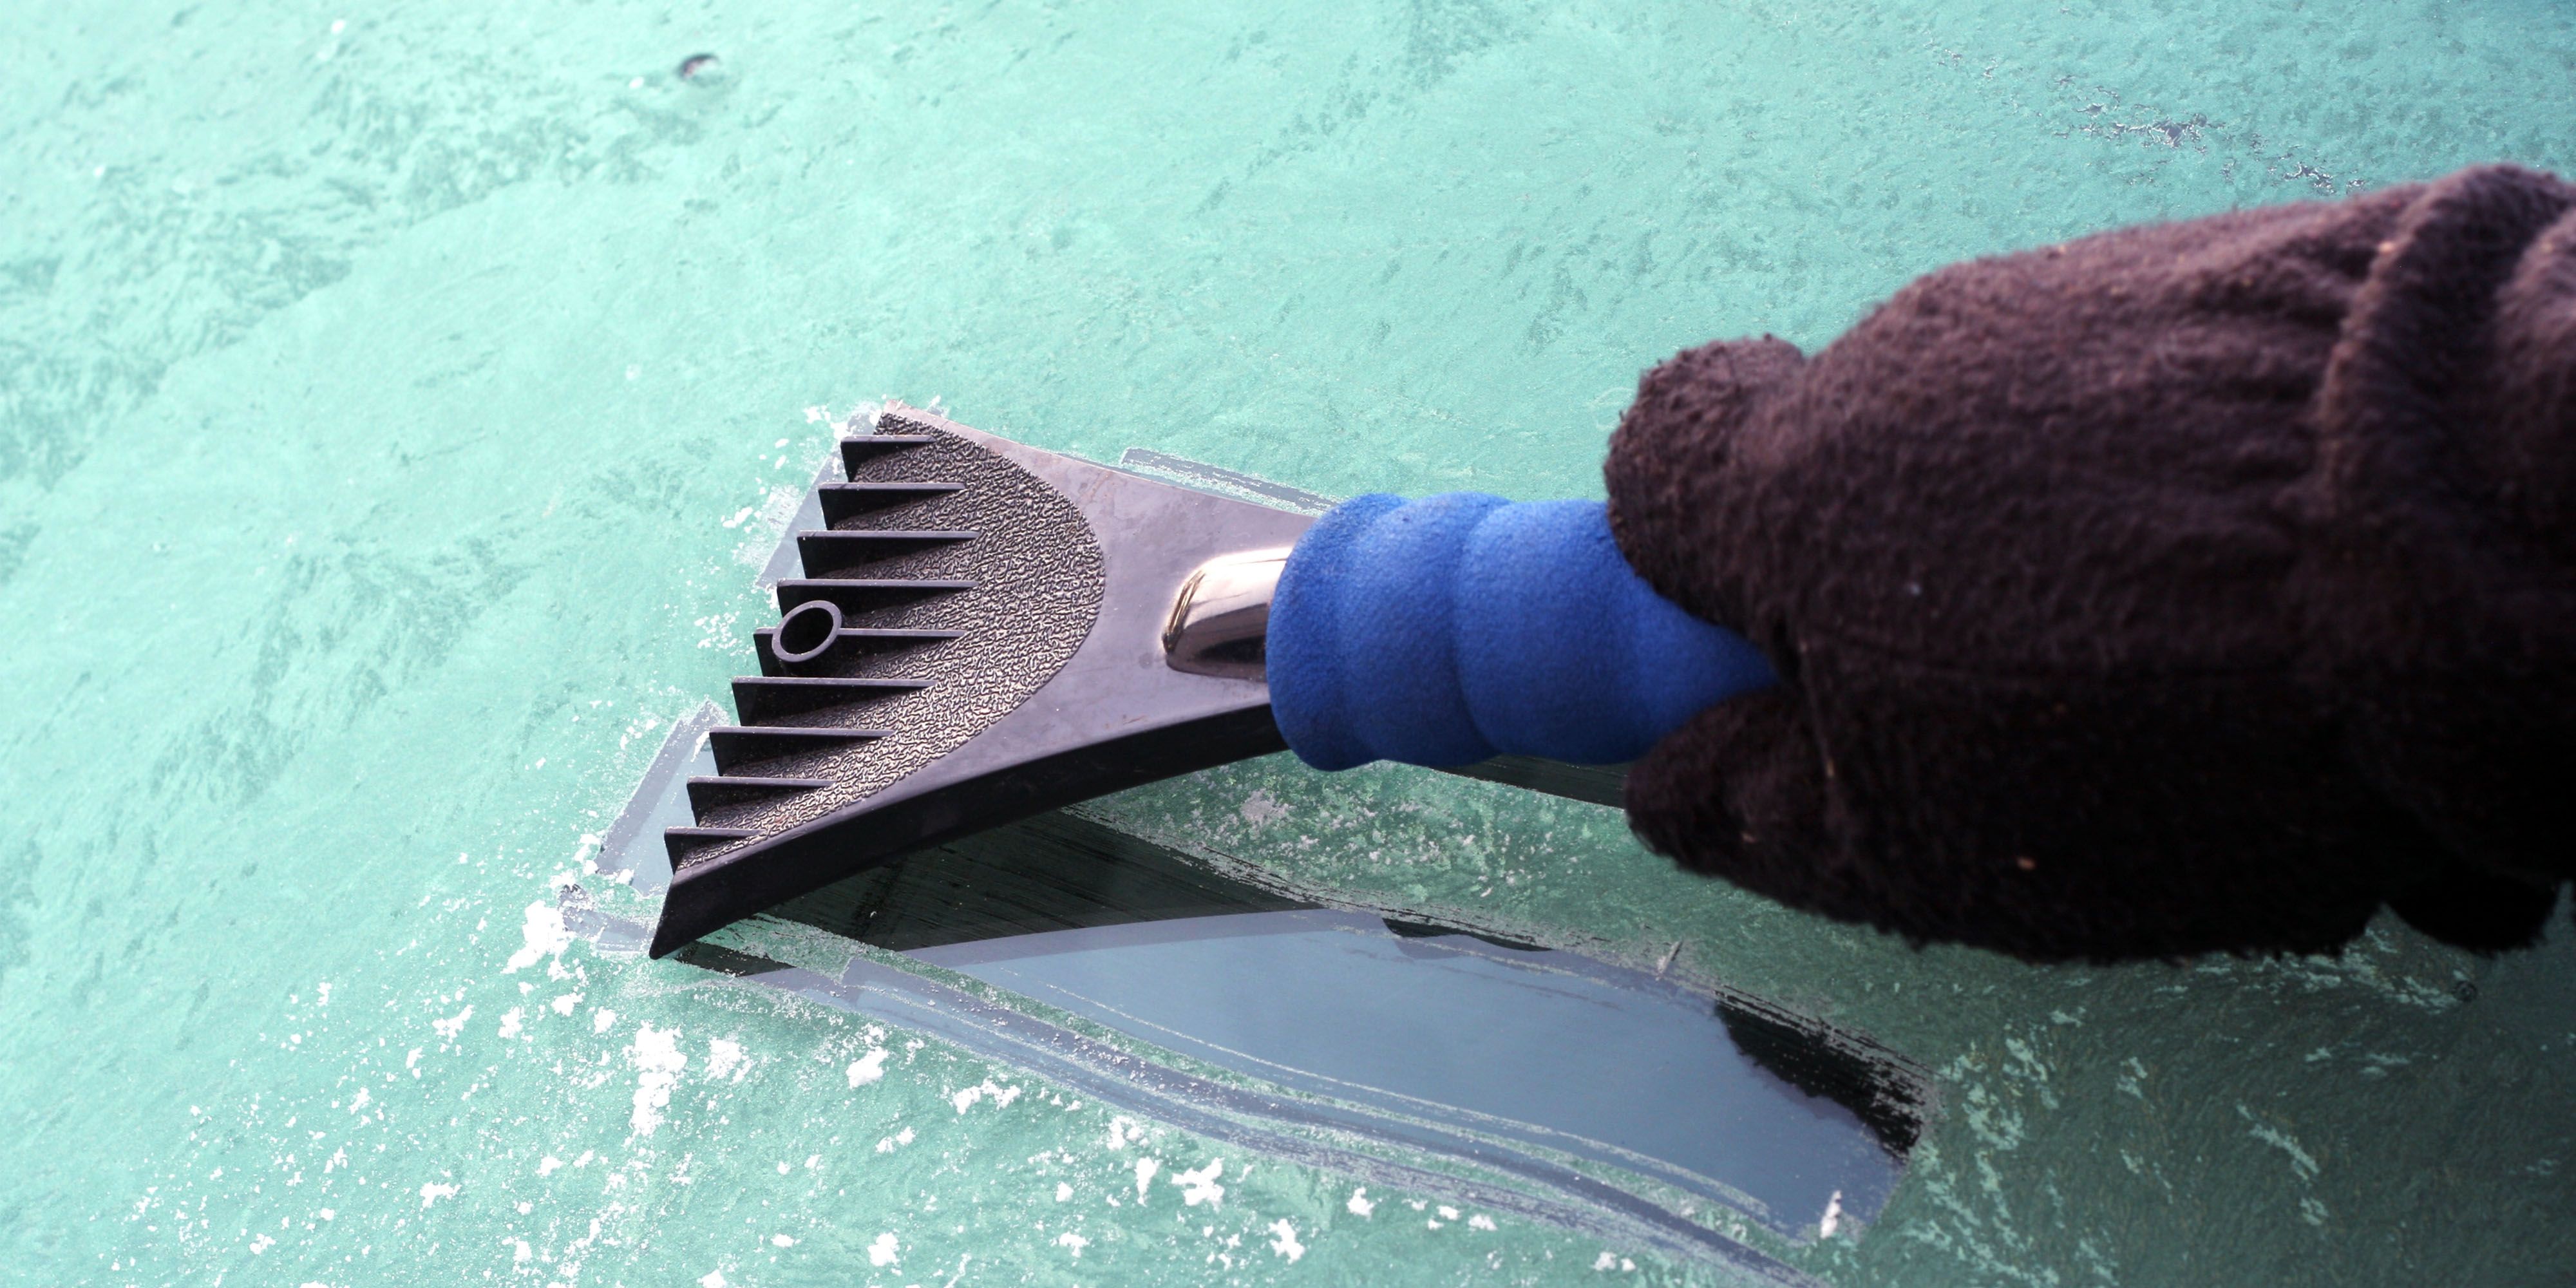 Scraping Snow and Ice Is the Law in These States - Snow Removal